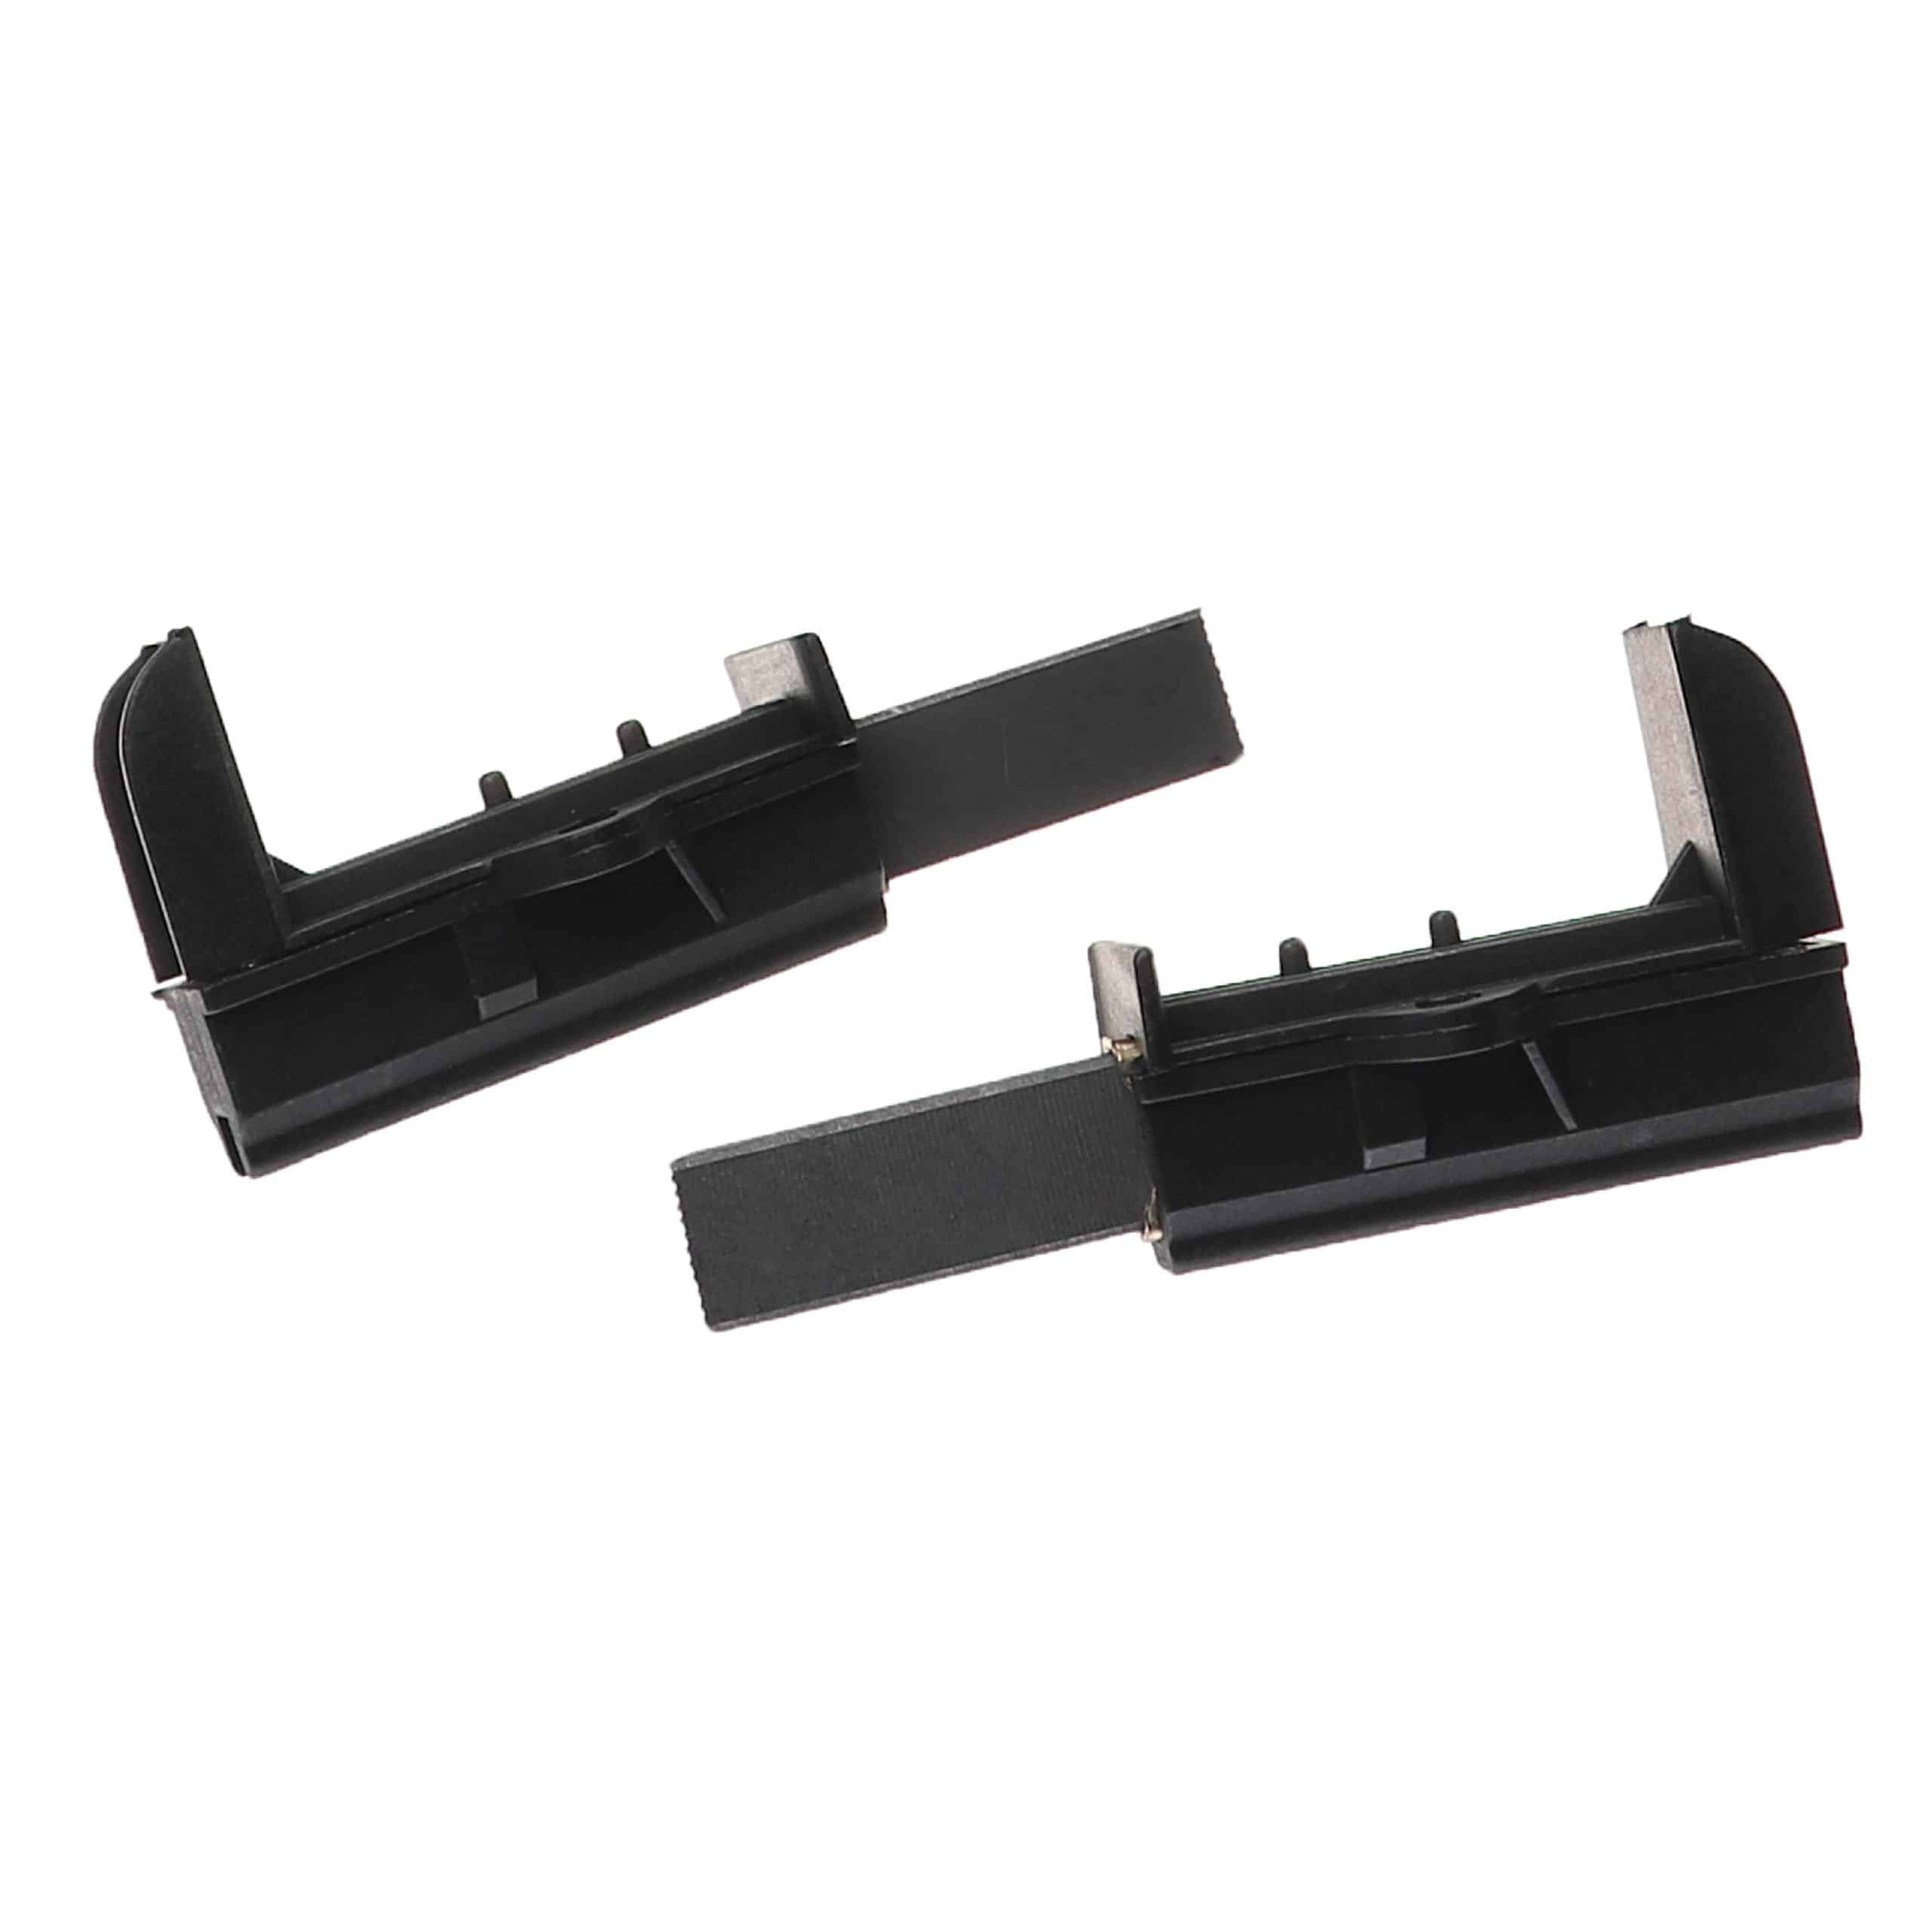 2x Carbon Brush as Replacement for 371201201, 371201202 Electric Power Tools + Holder, 5 x 12.5 x 29mm